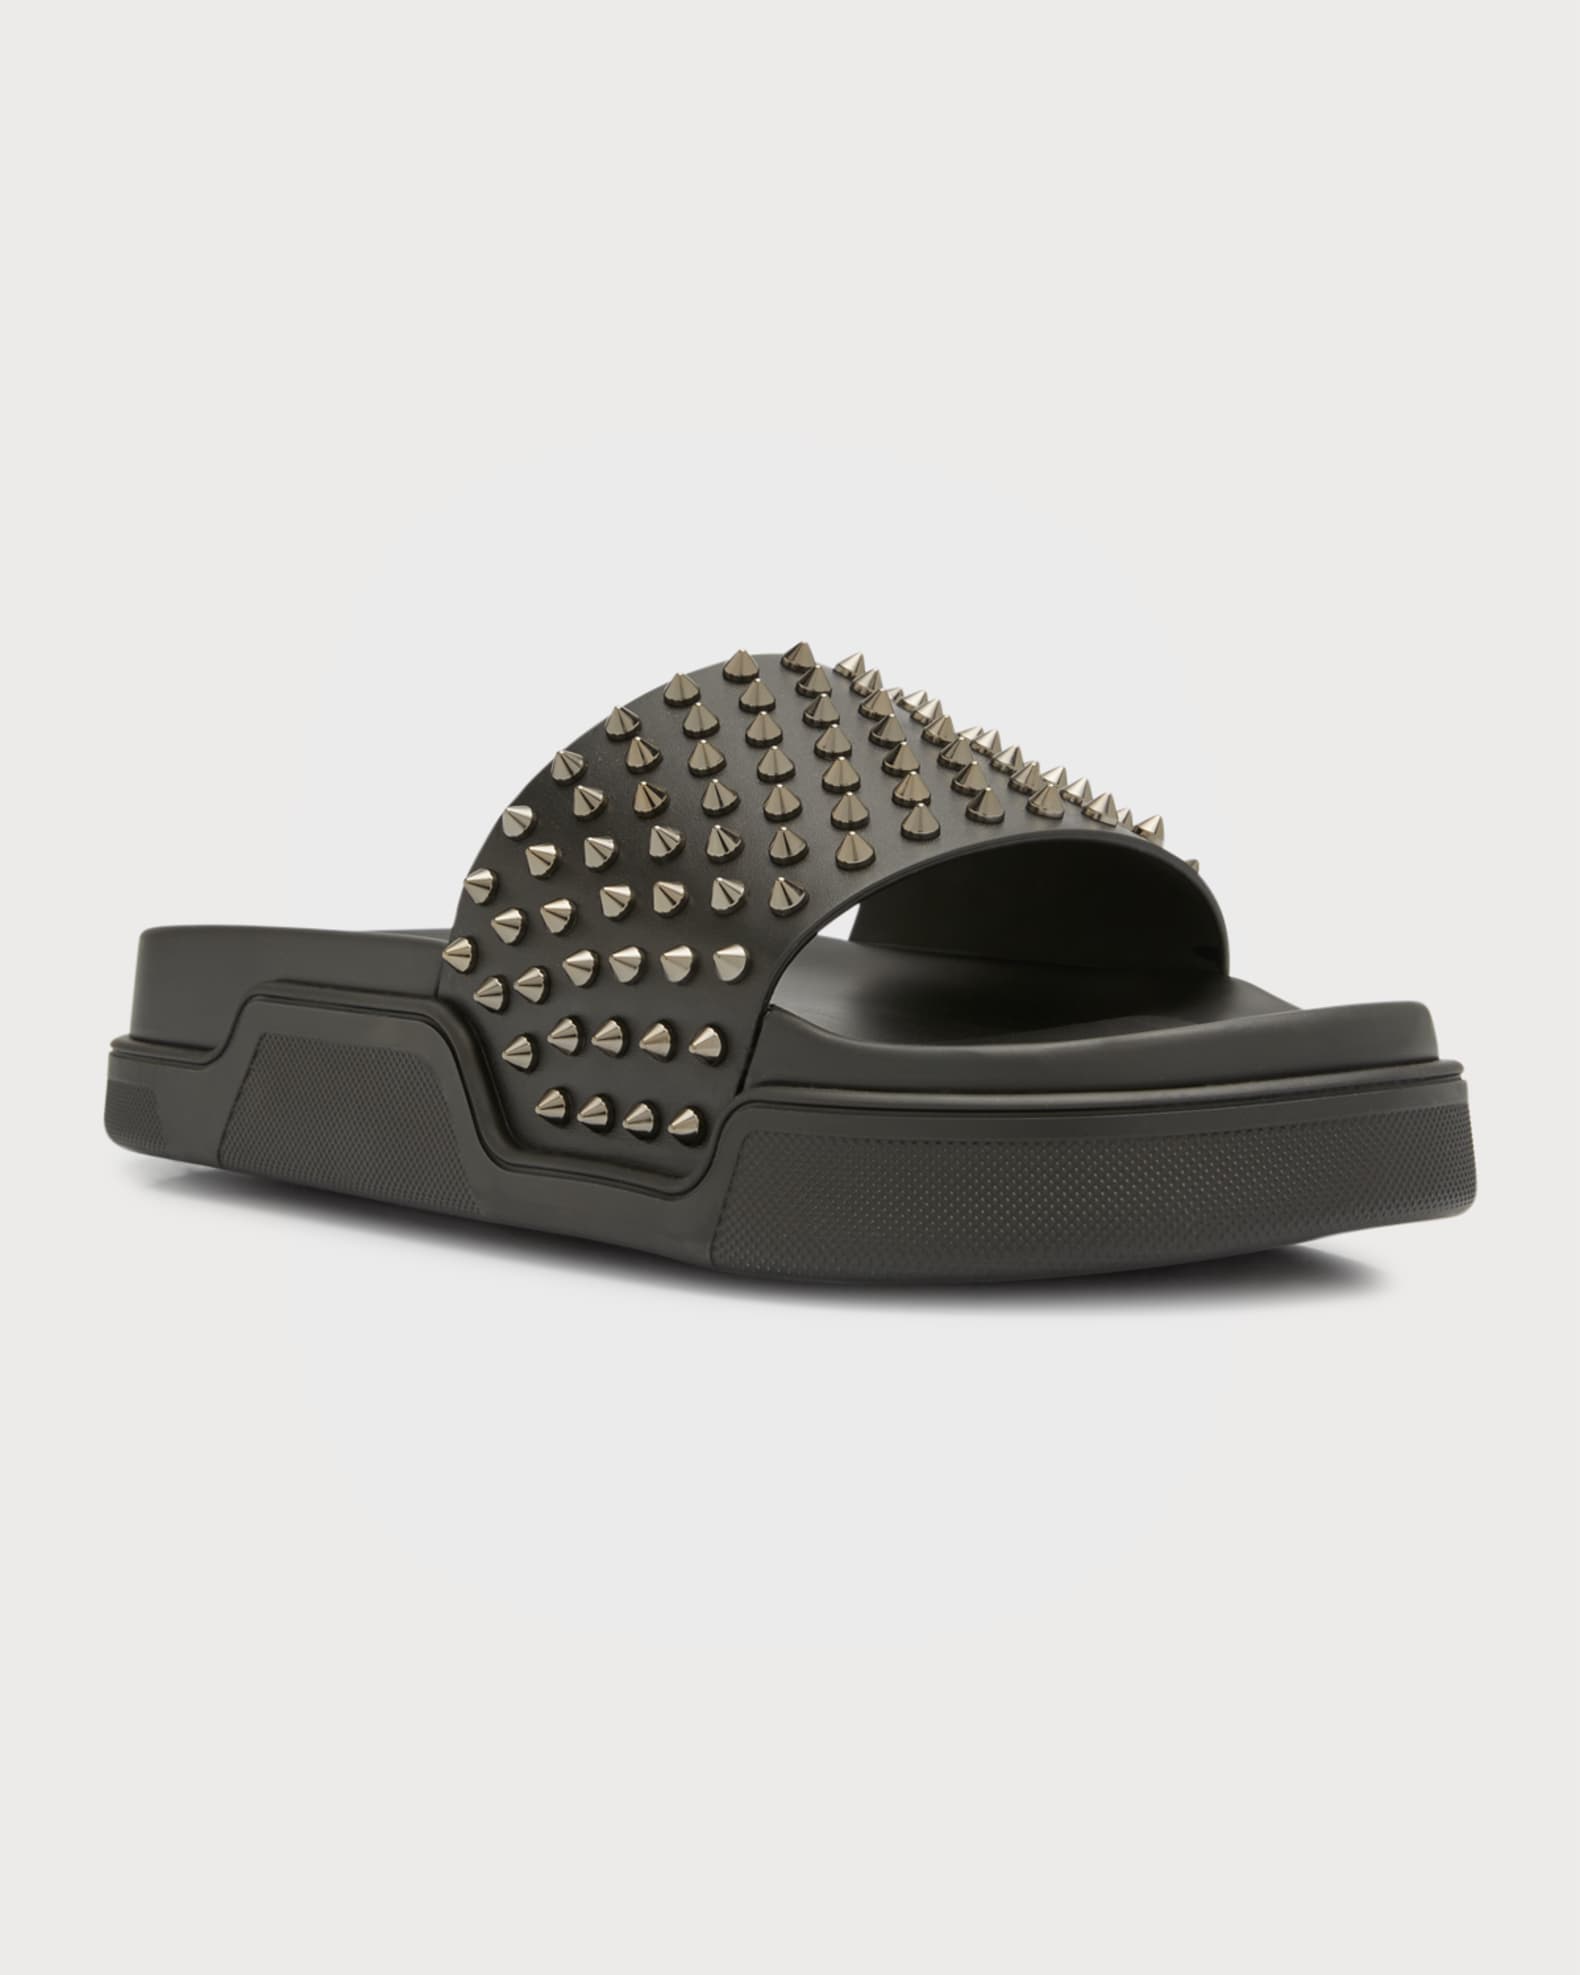 Christian Louboutin Men's Pool Fun Spiked Leather Slide Sandals ...